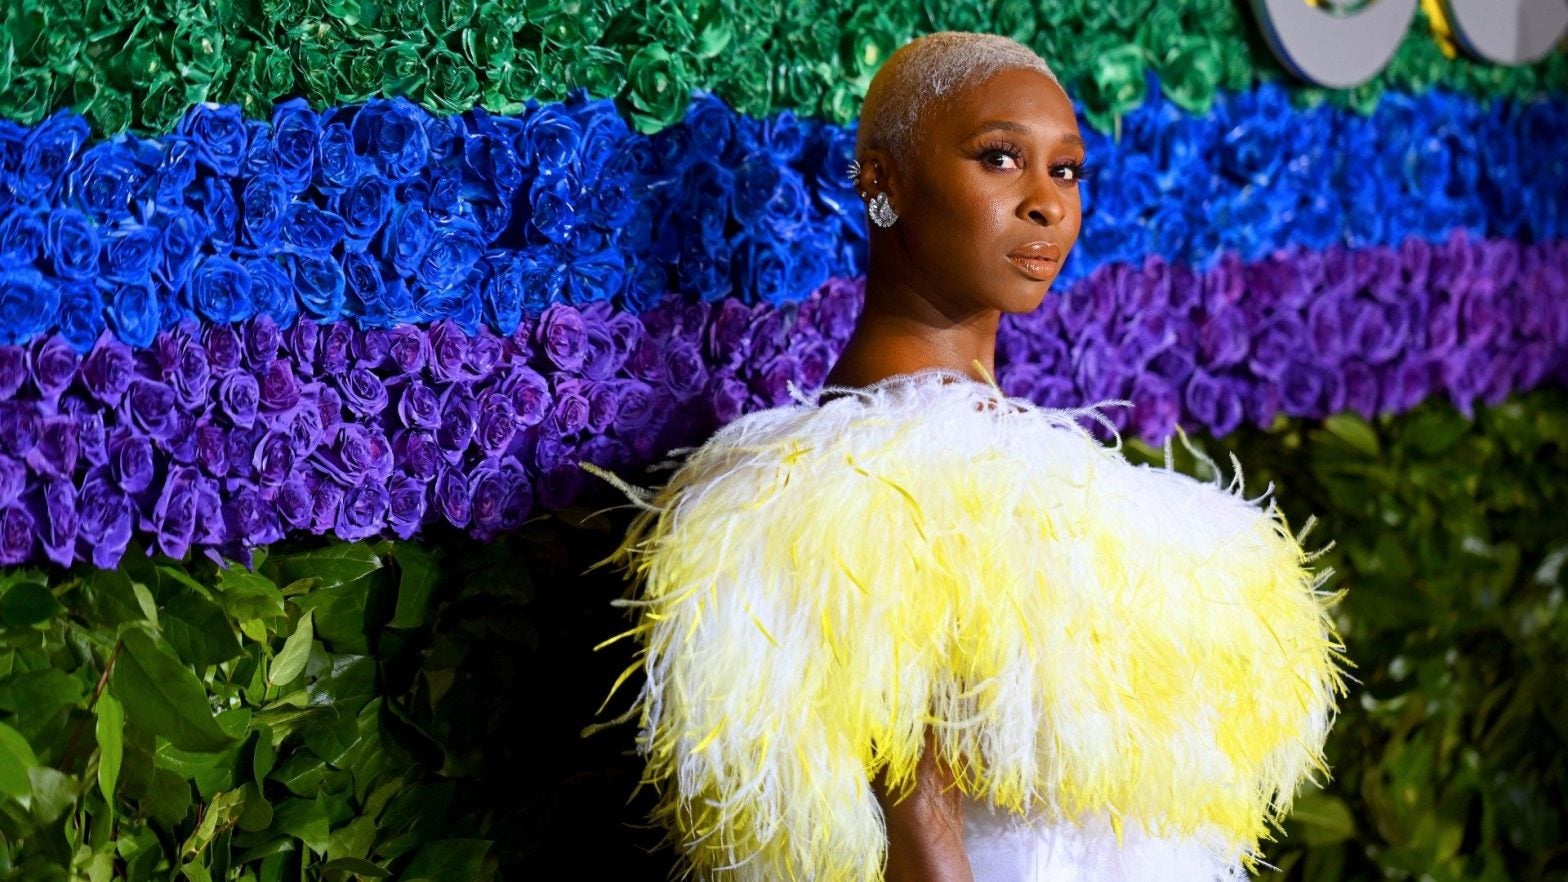 Cynthia Erivo's Black Women In Hollywood Speech Will Move You To Tears